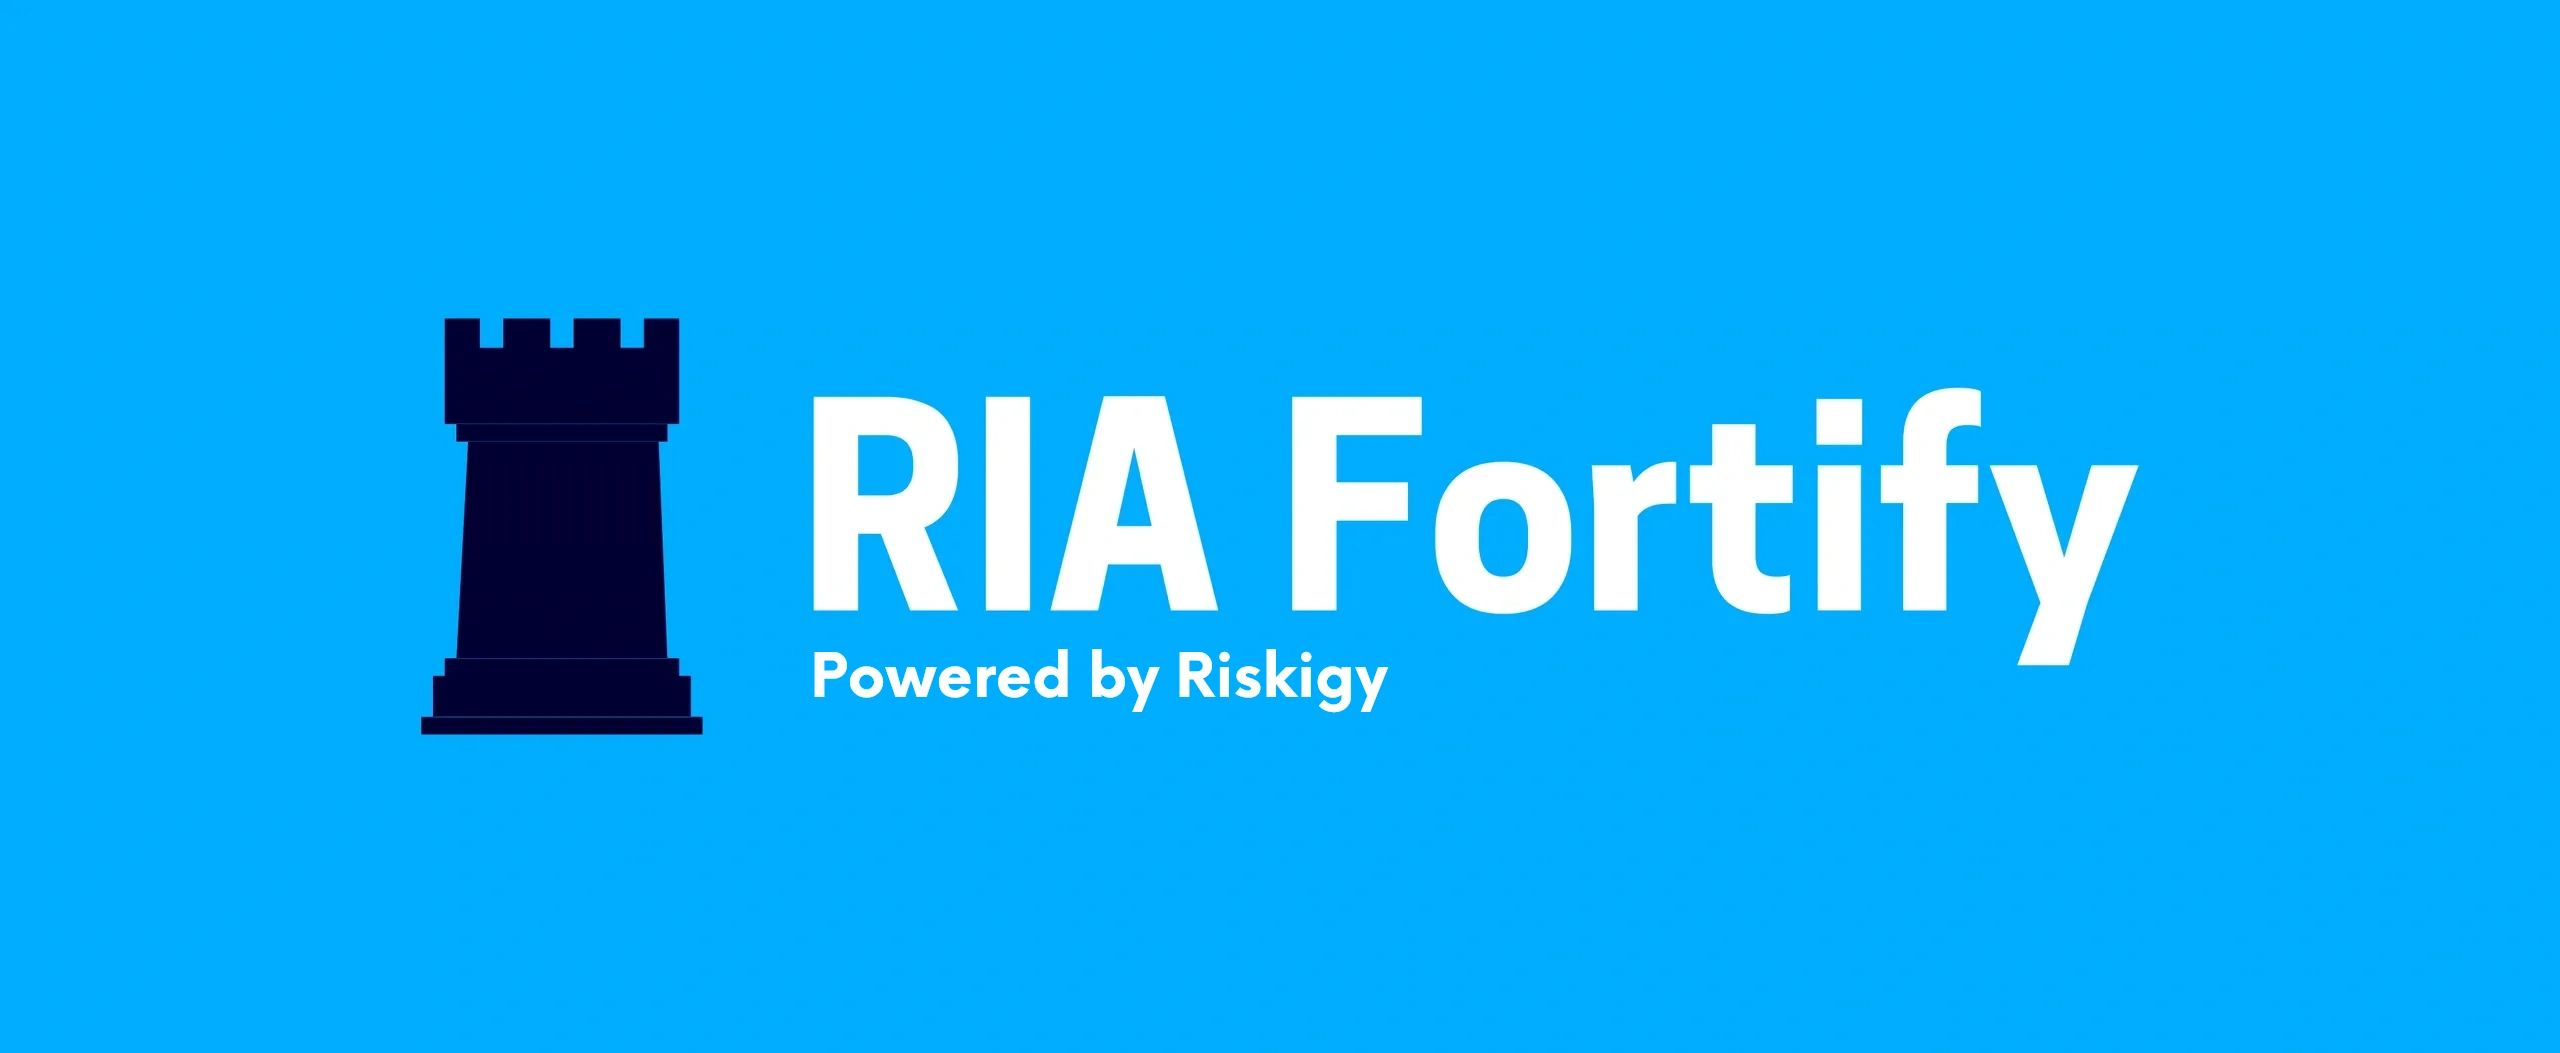 RIA Fortify from Riskigy provides Investment Advisors (RIAs) rightsized Cybersecurity services. 